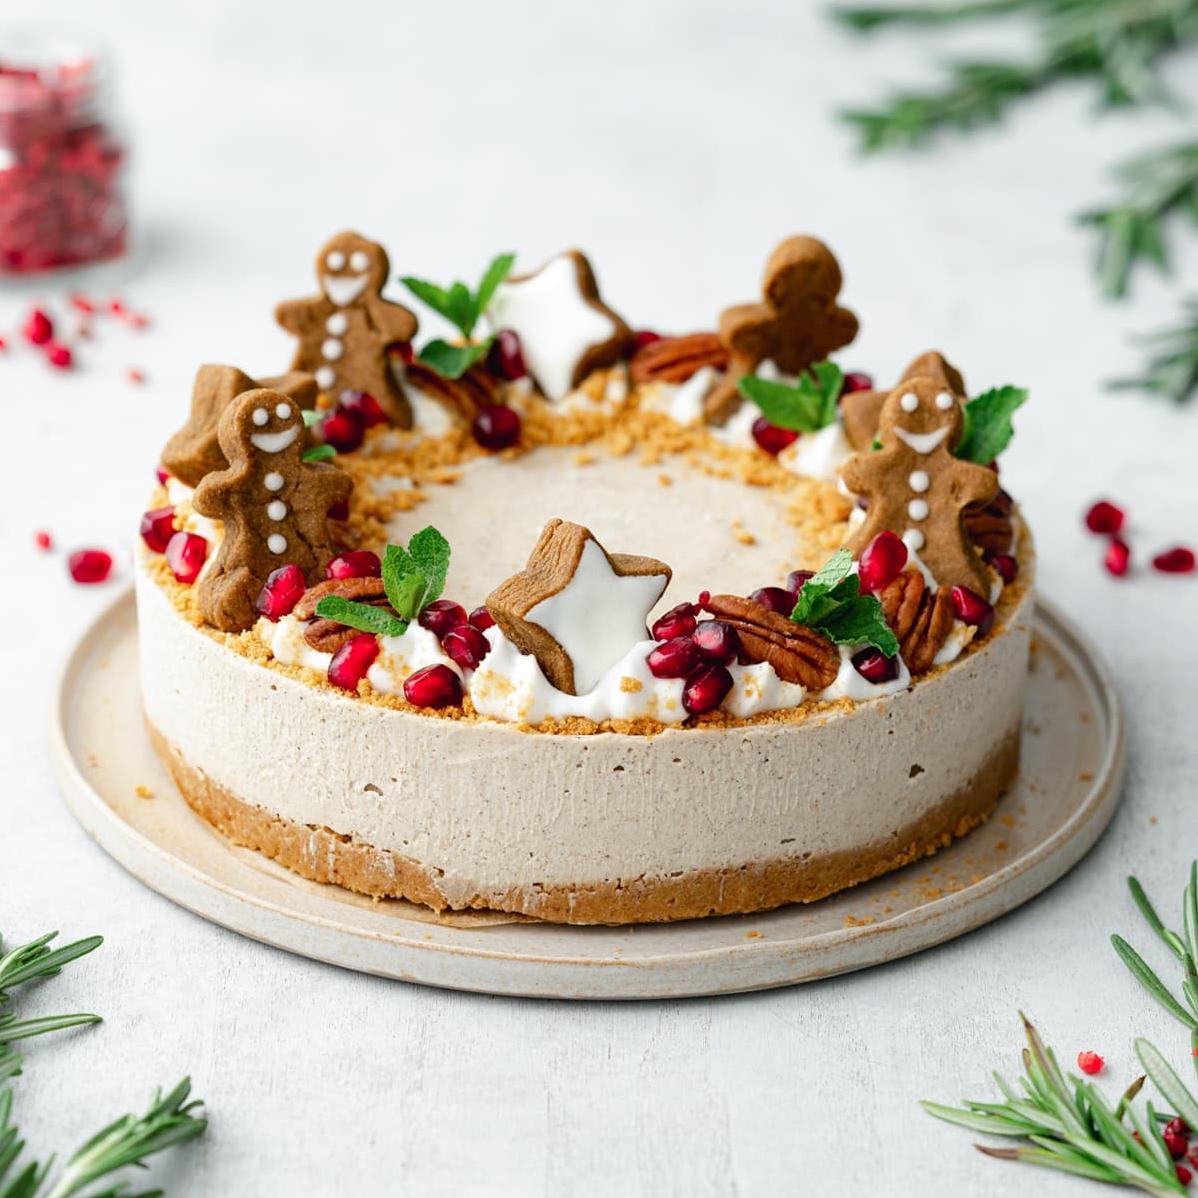  A slice of heaven on a plate: Gluten-free gingerbread cheesecake with a gingerbread crust.